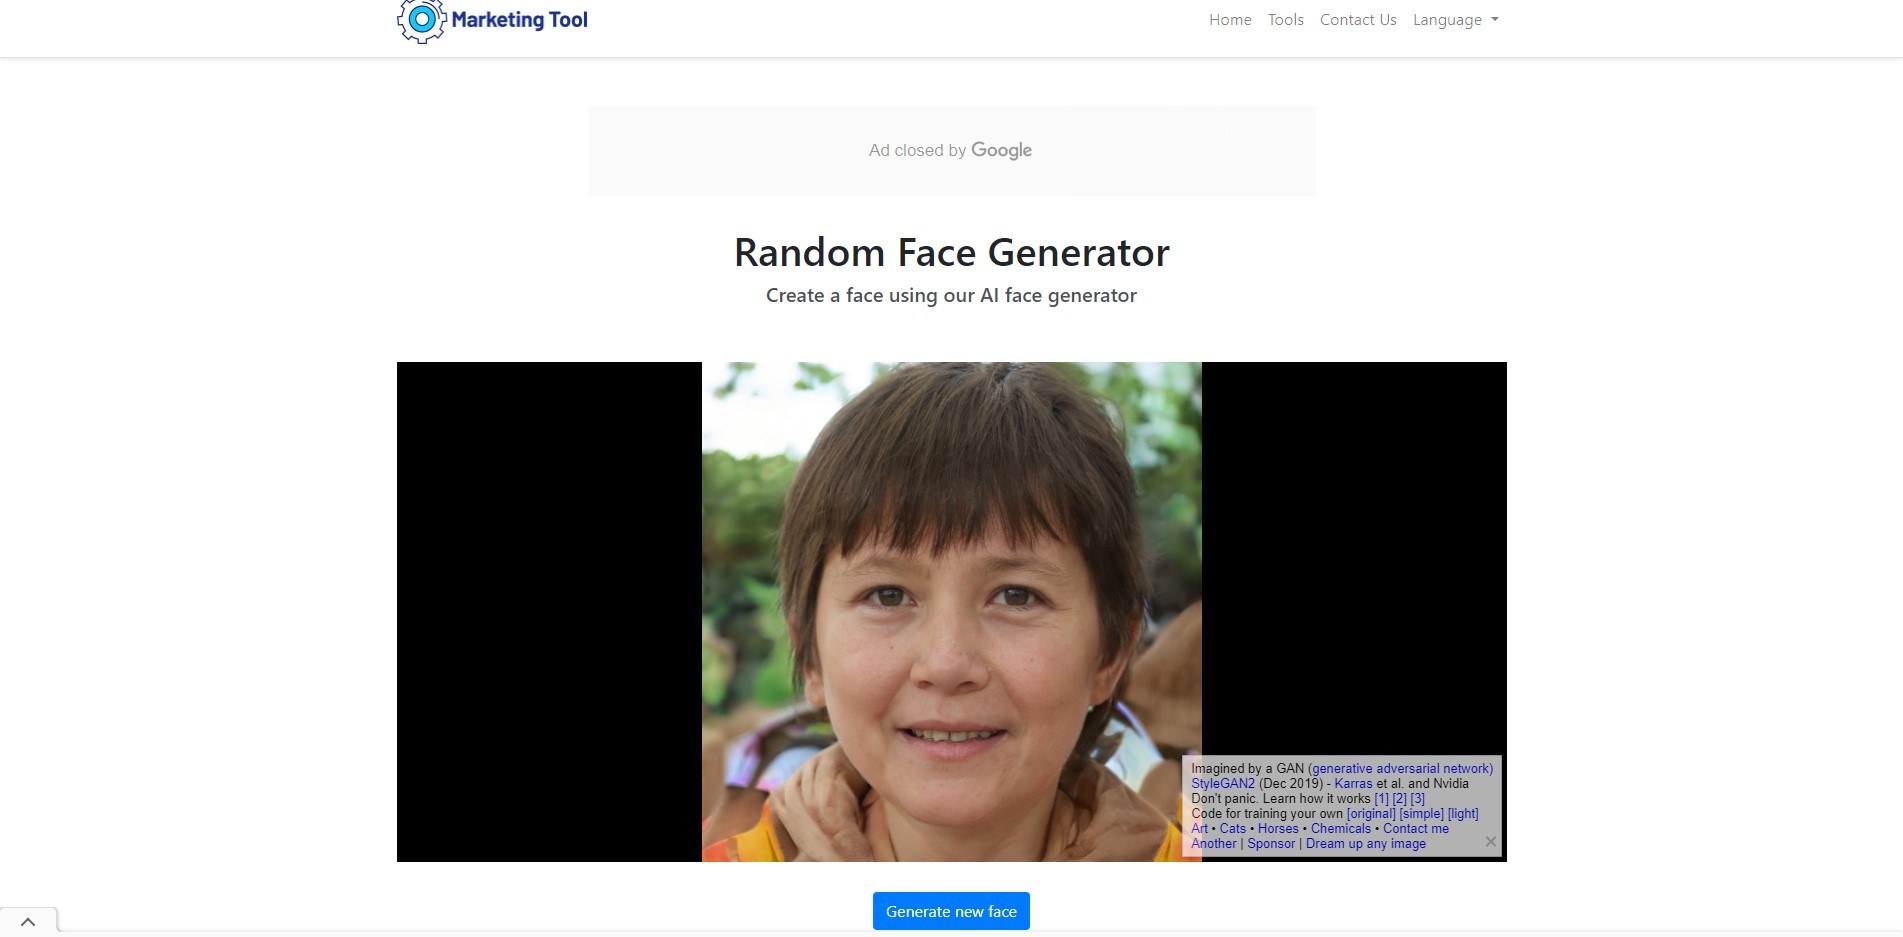 marketing tool ai face generator home page